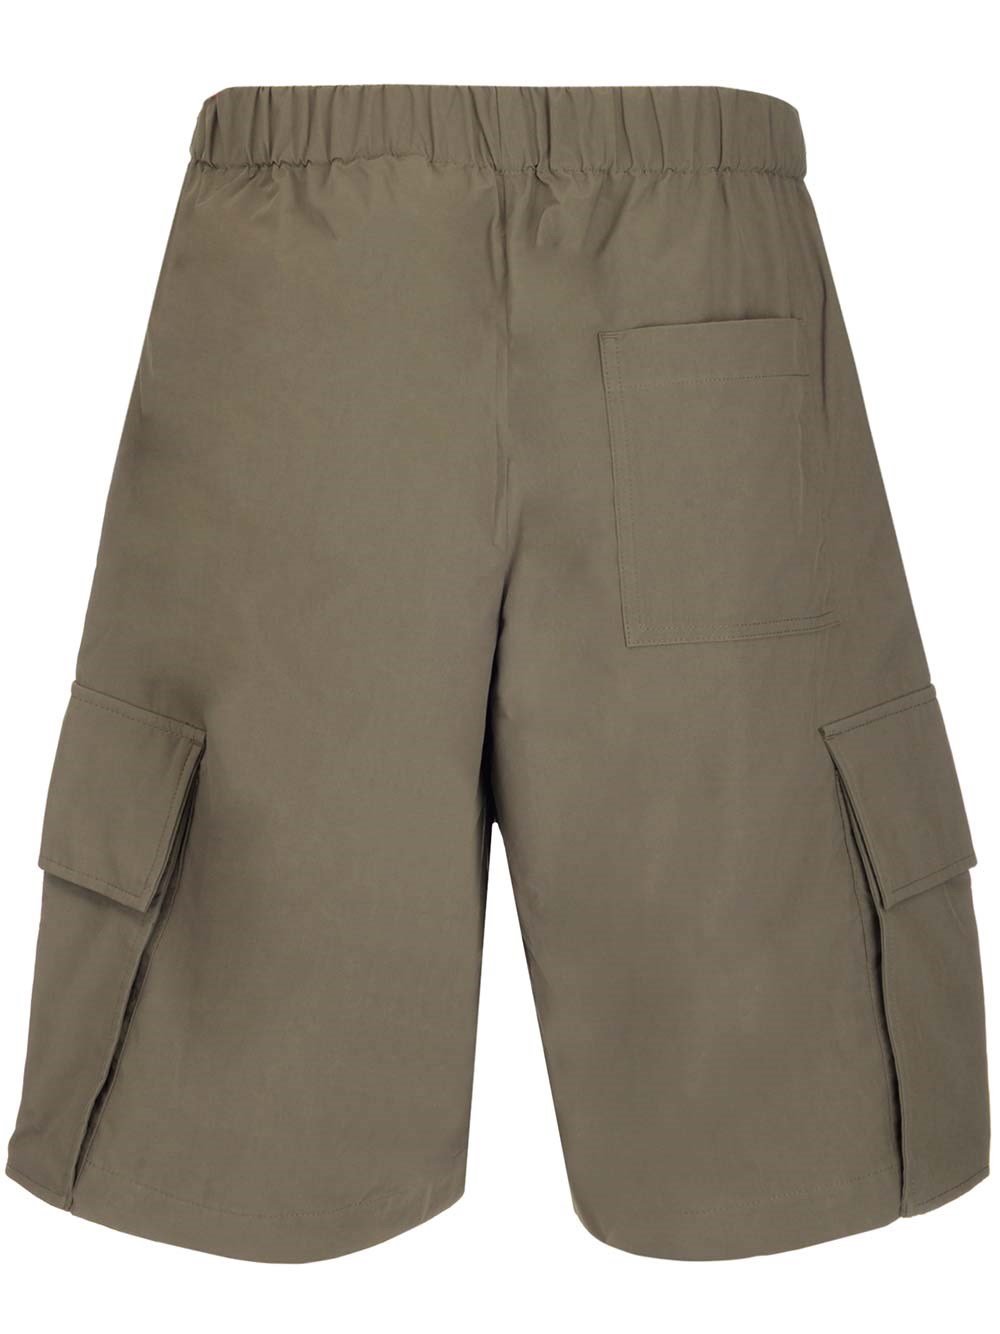 Off-White Belted Cargo Shorts